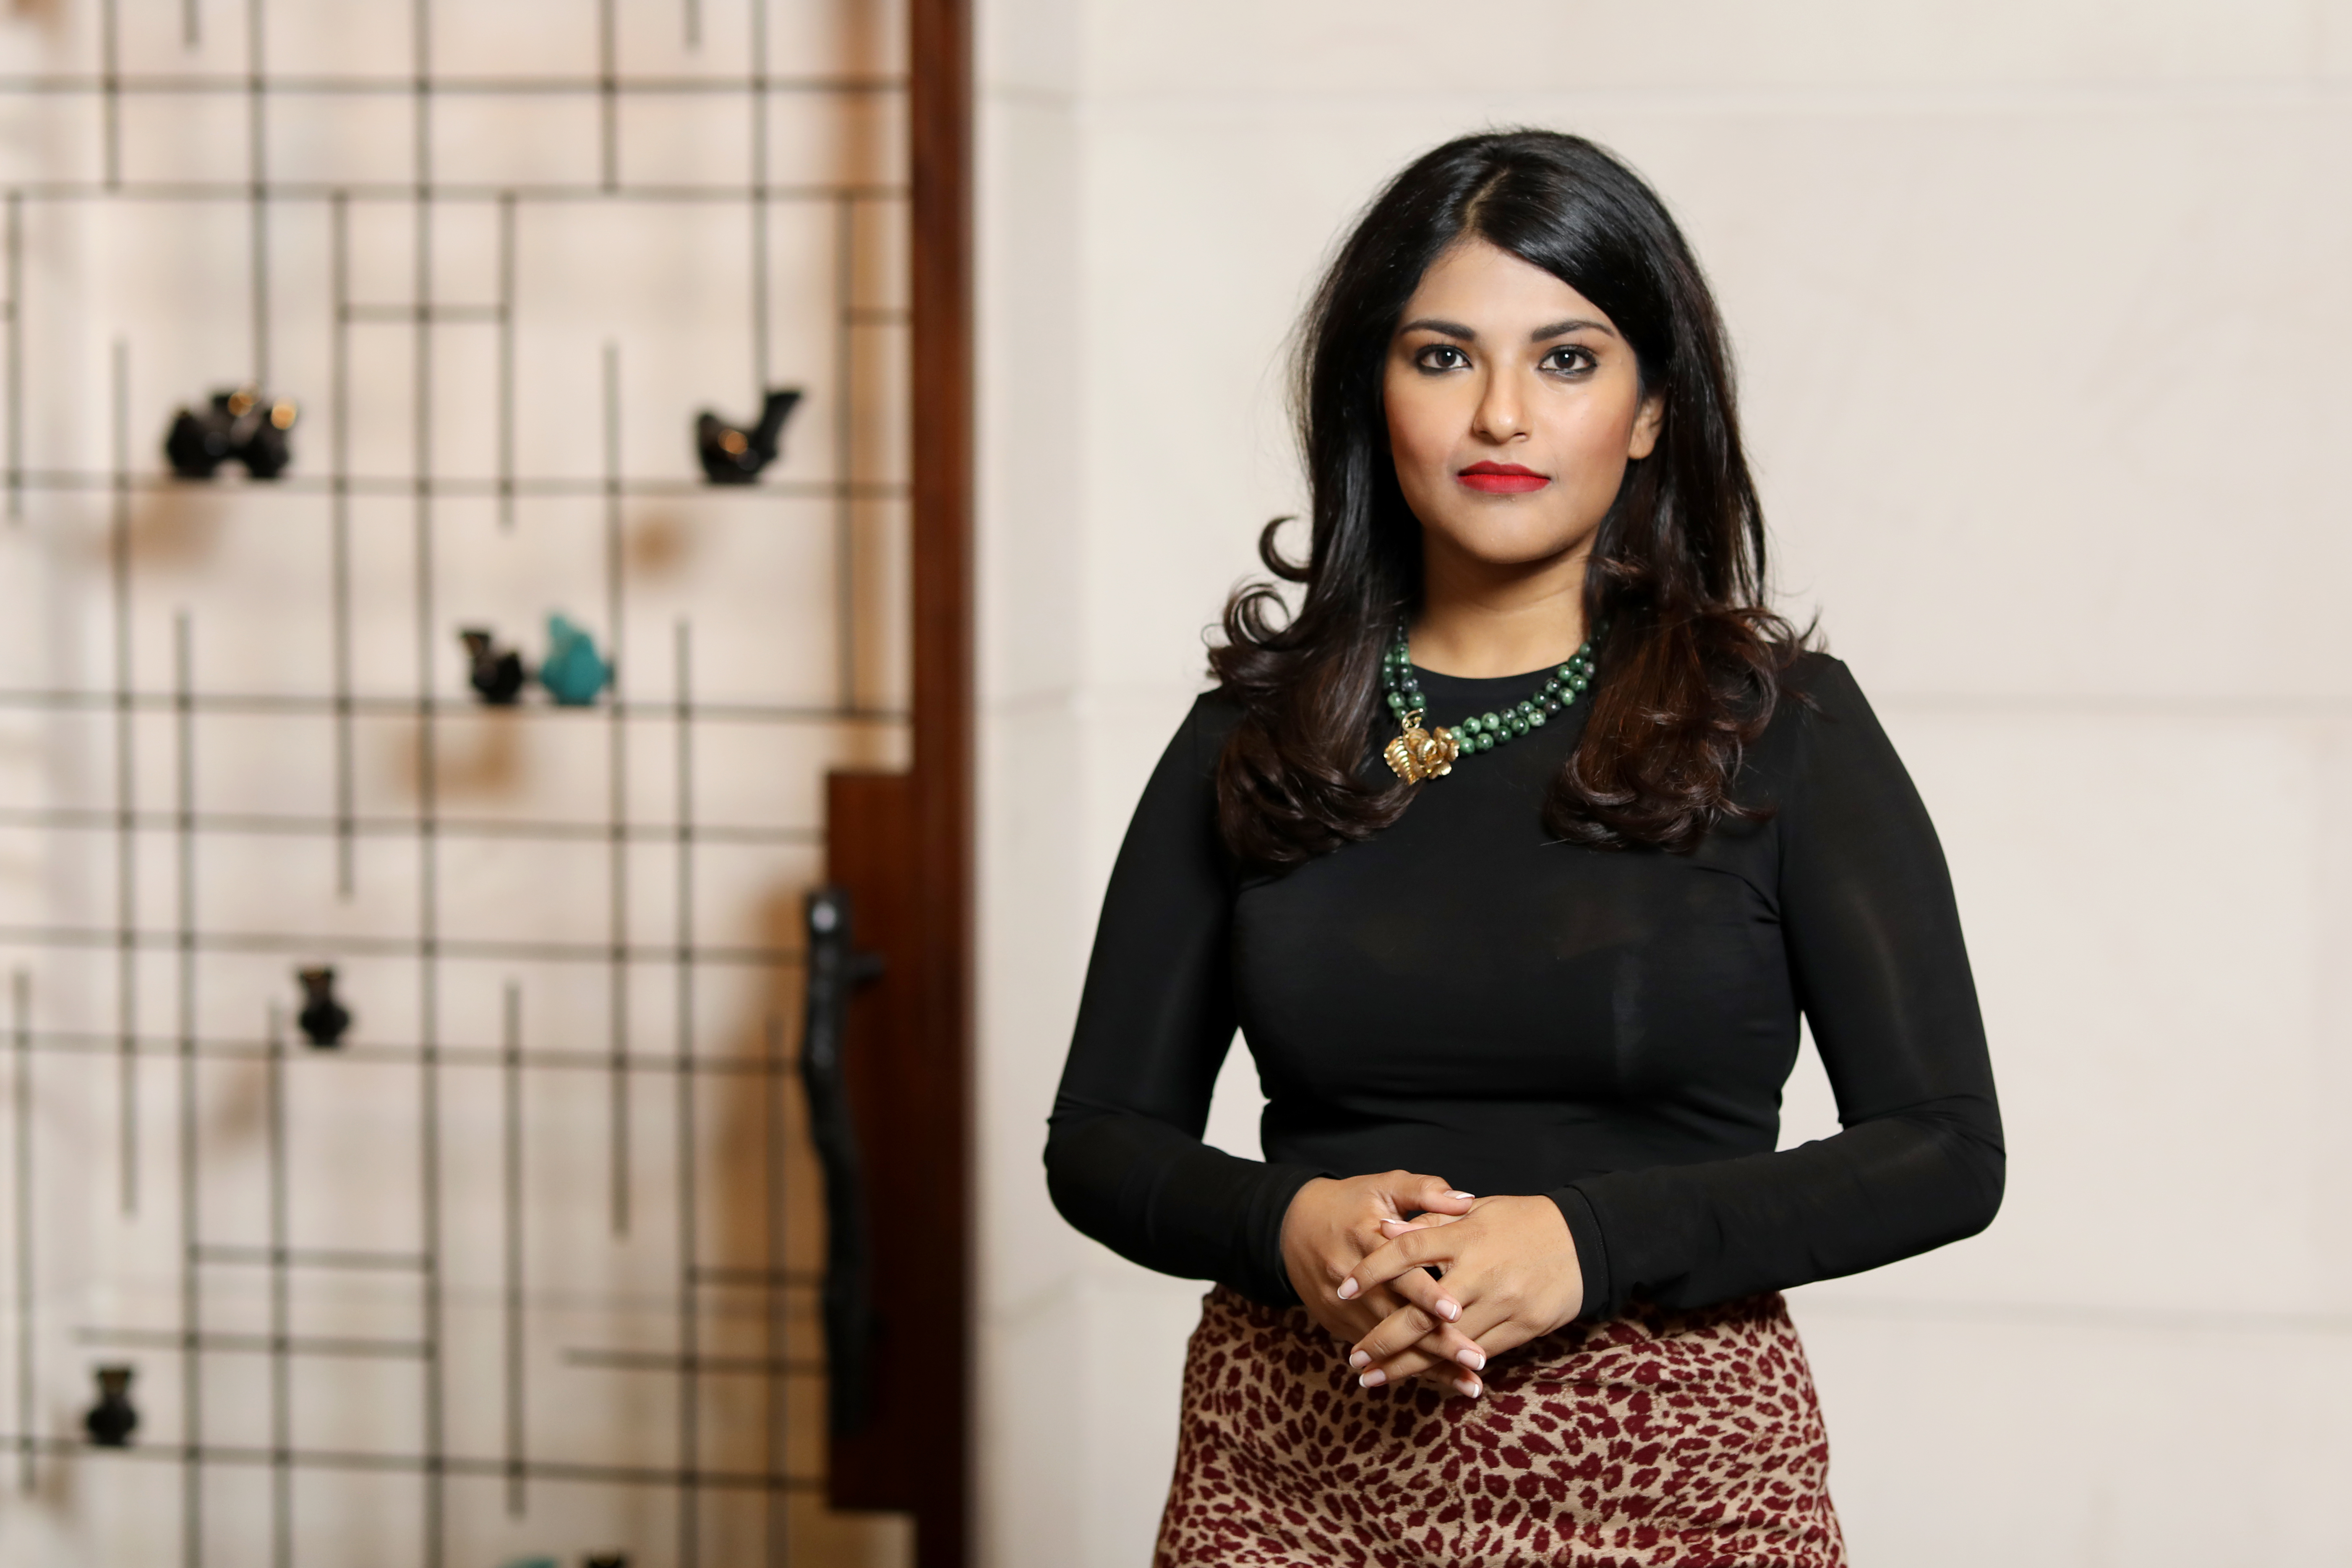 Zilingo CEO Ankiti Bose fights back against ‘witch hunt’ as board considers turning suspension into a permanent firing